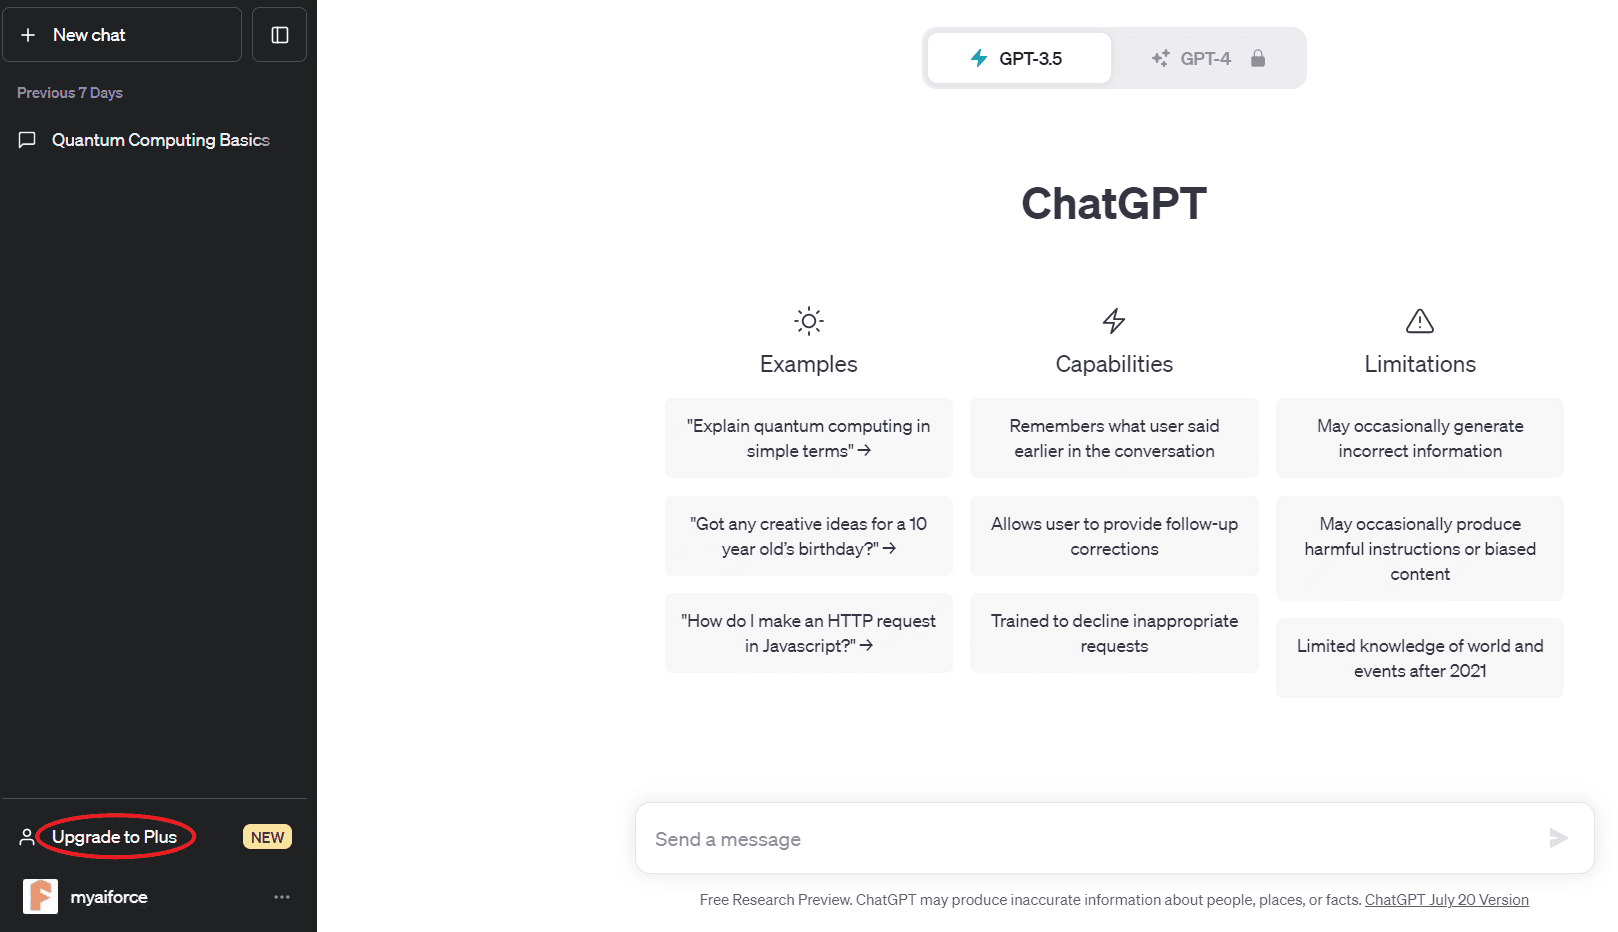 chatgpt interface upgrade to plus button